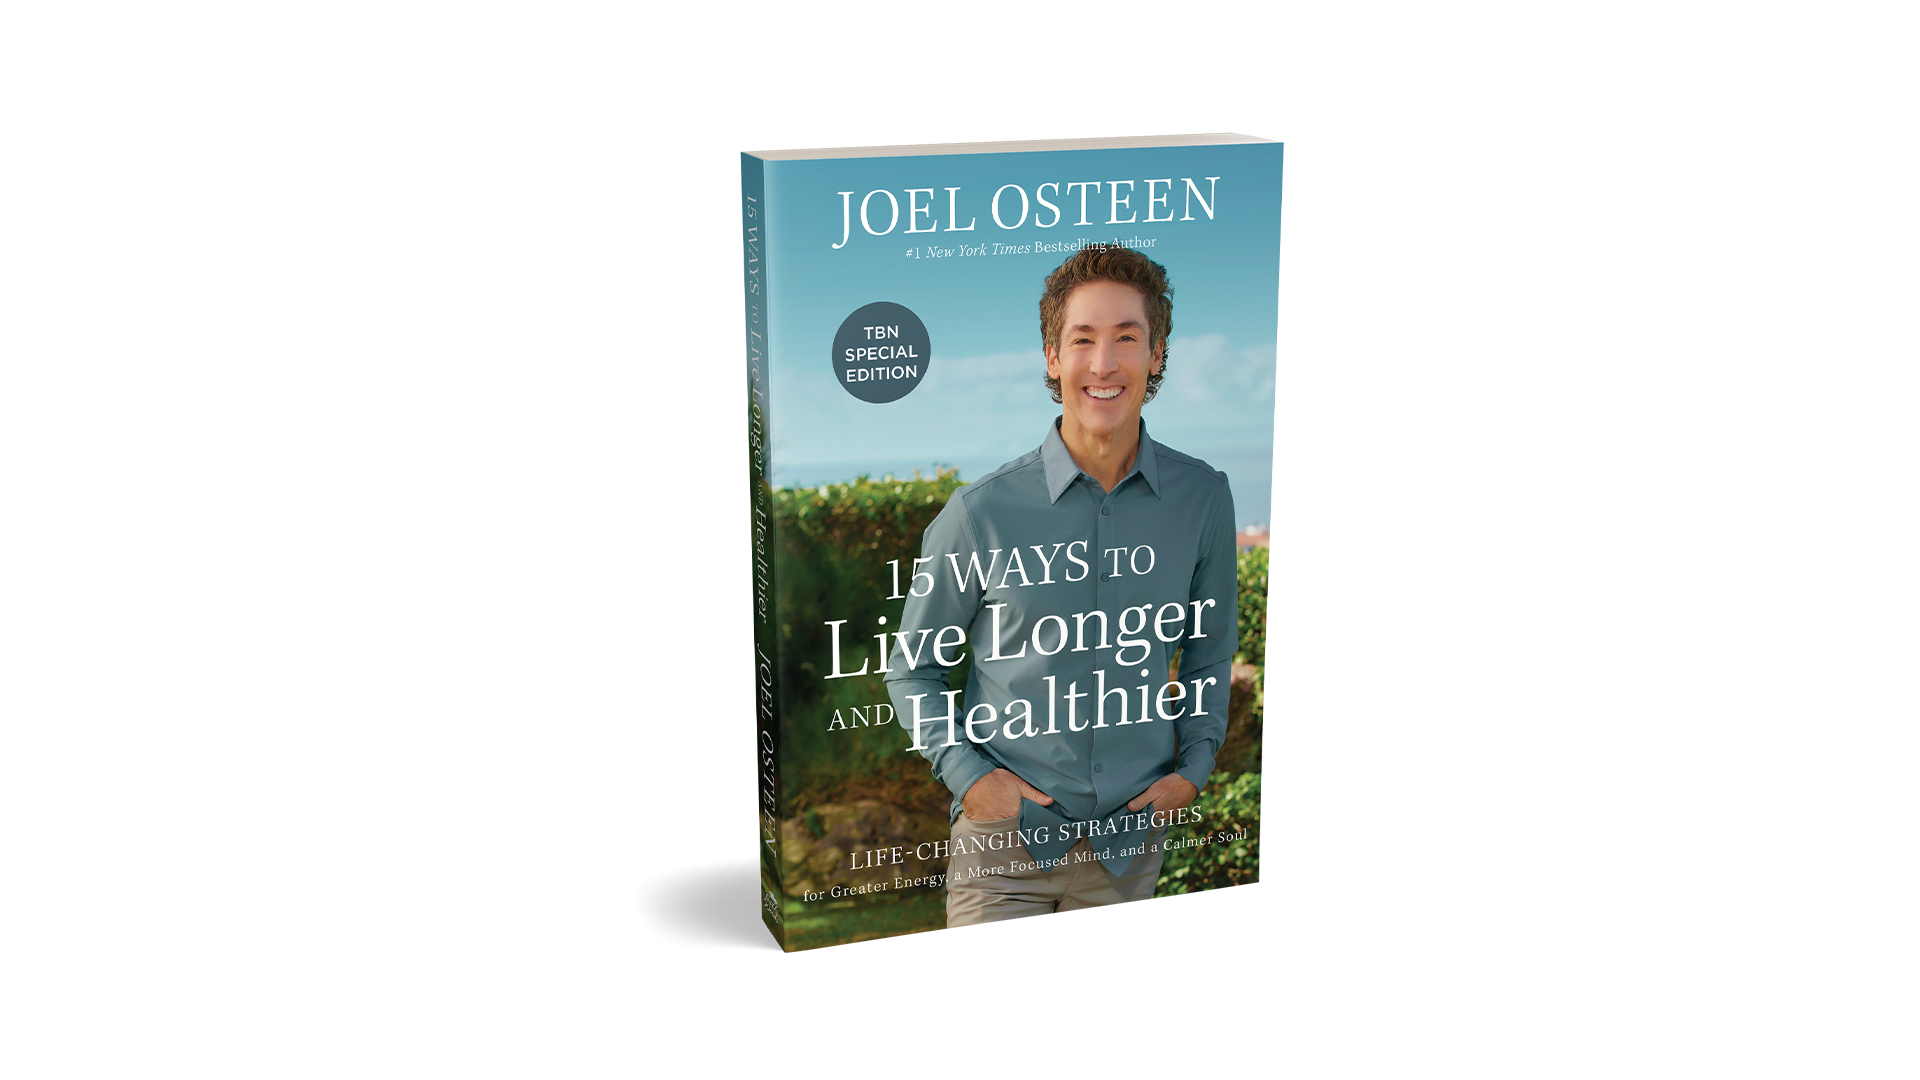 15 Ways to Live Longer and Healthier by Joel Osteen by TBN